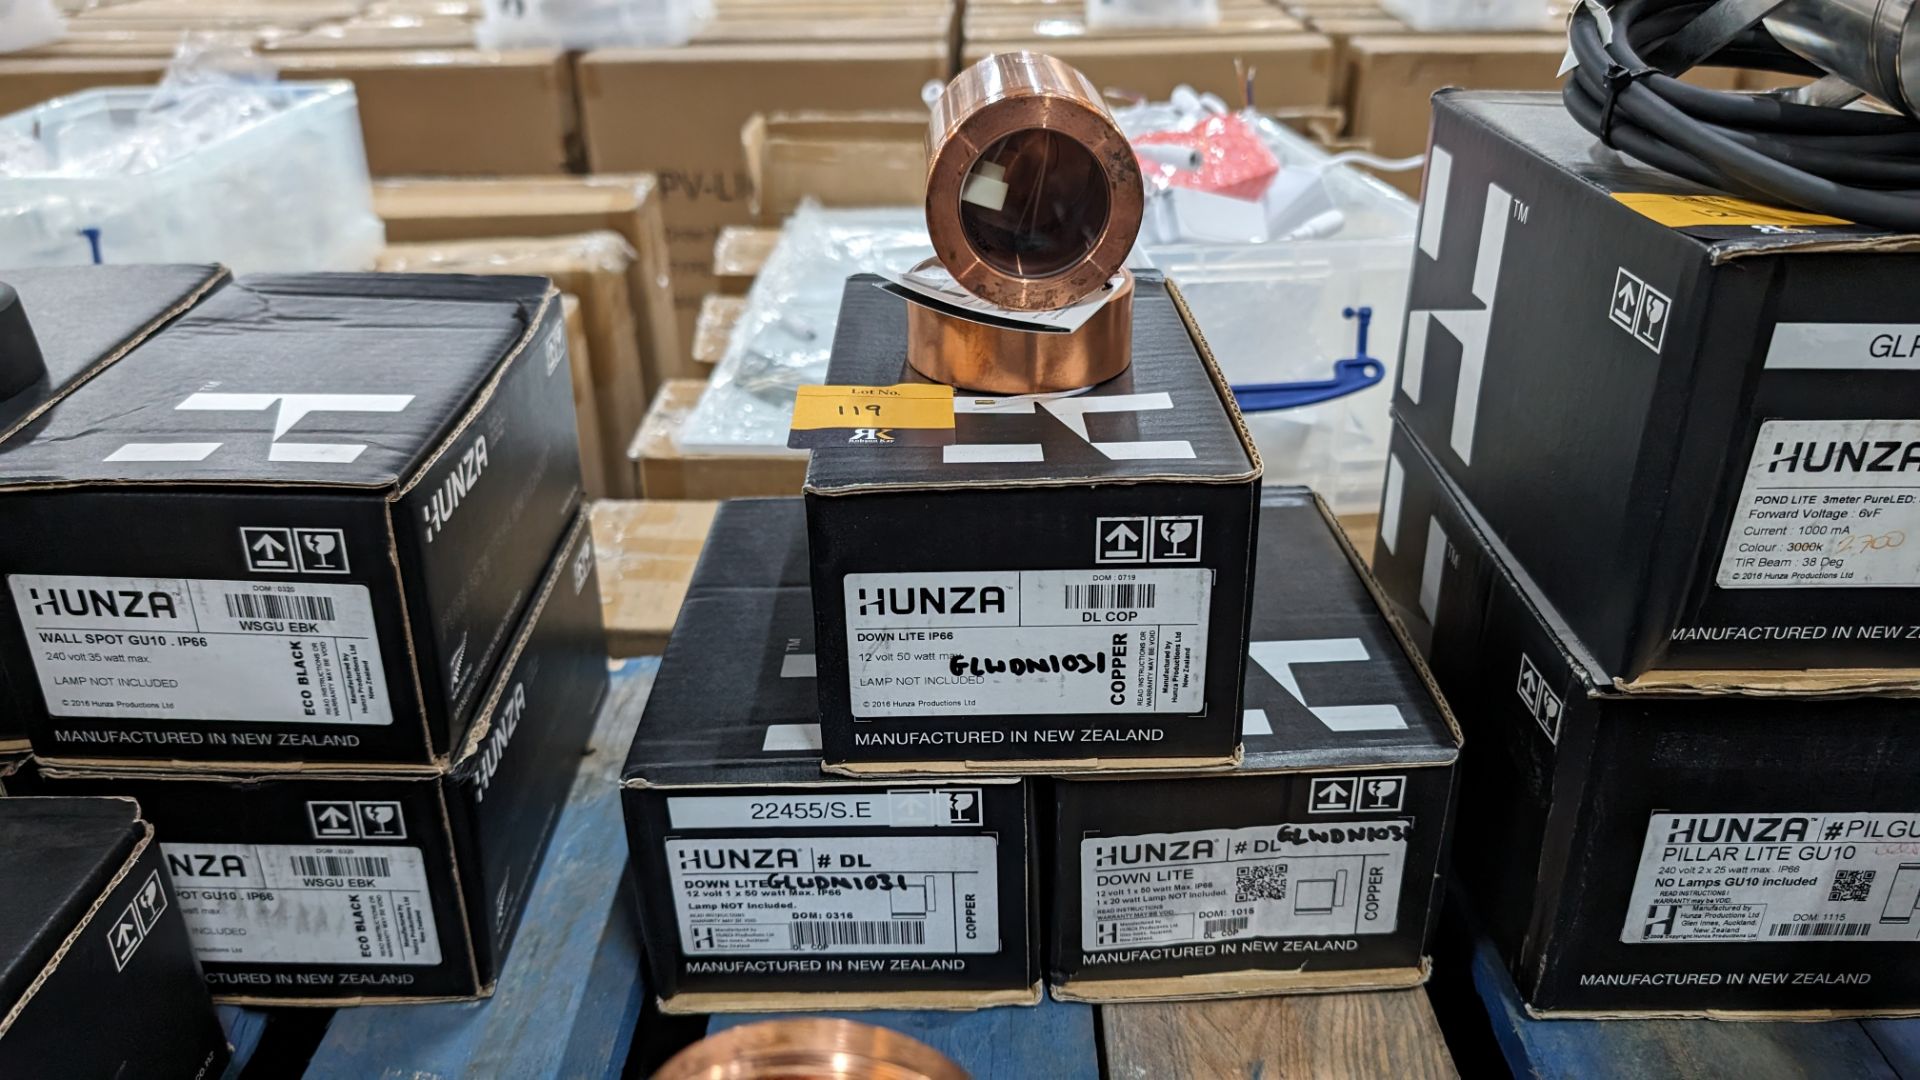 3 off Hunza copper downlights - Image 2 of 5